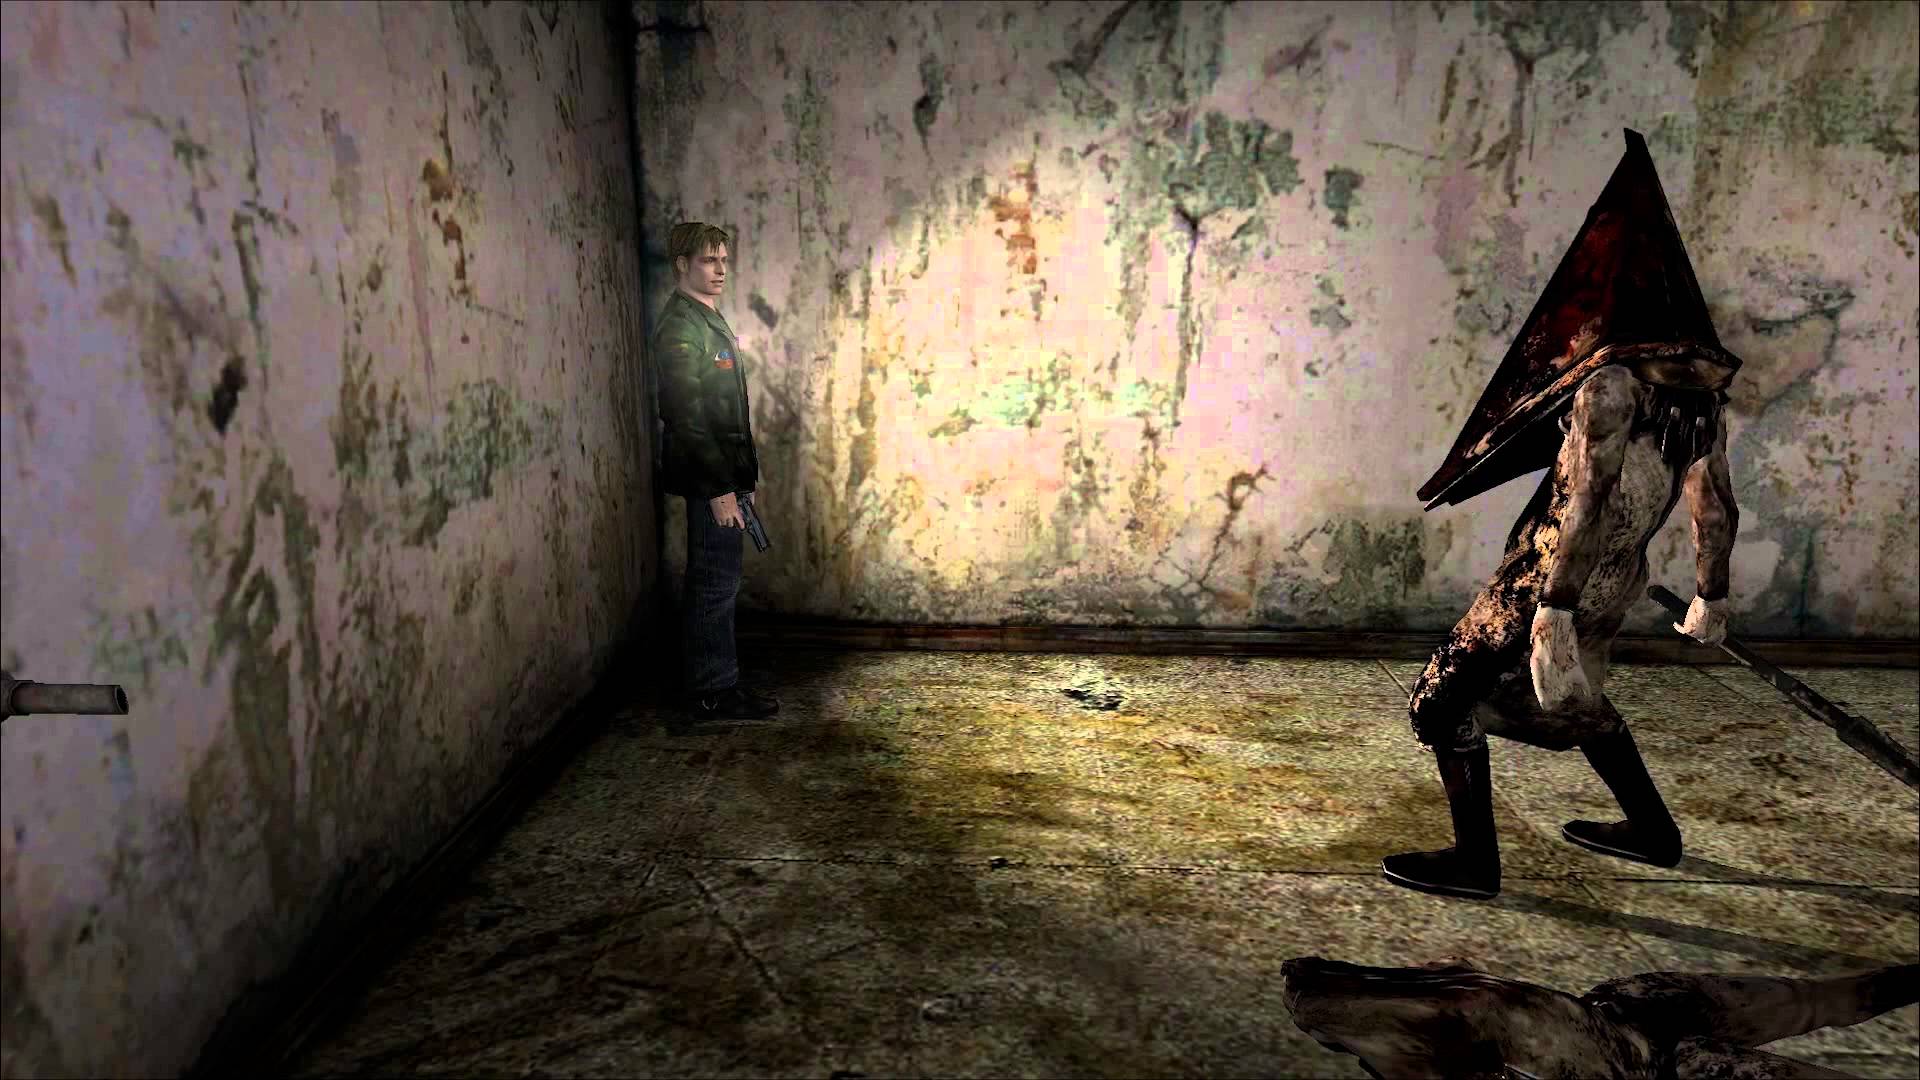 Konami wants more Silent Hill games in the future, if devs have